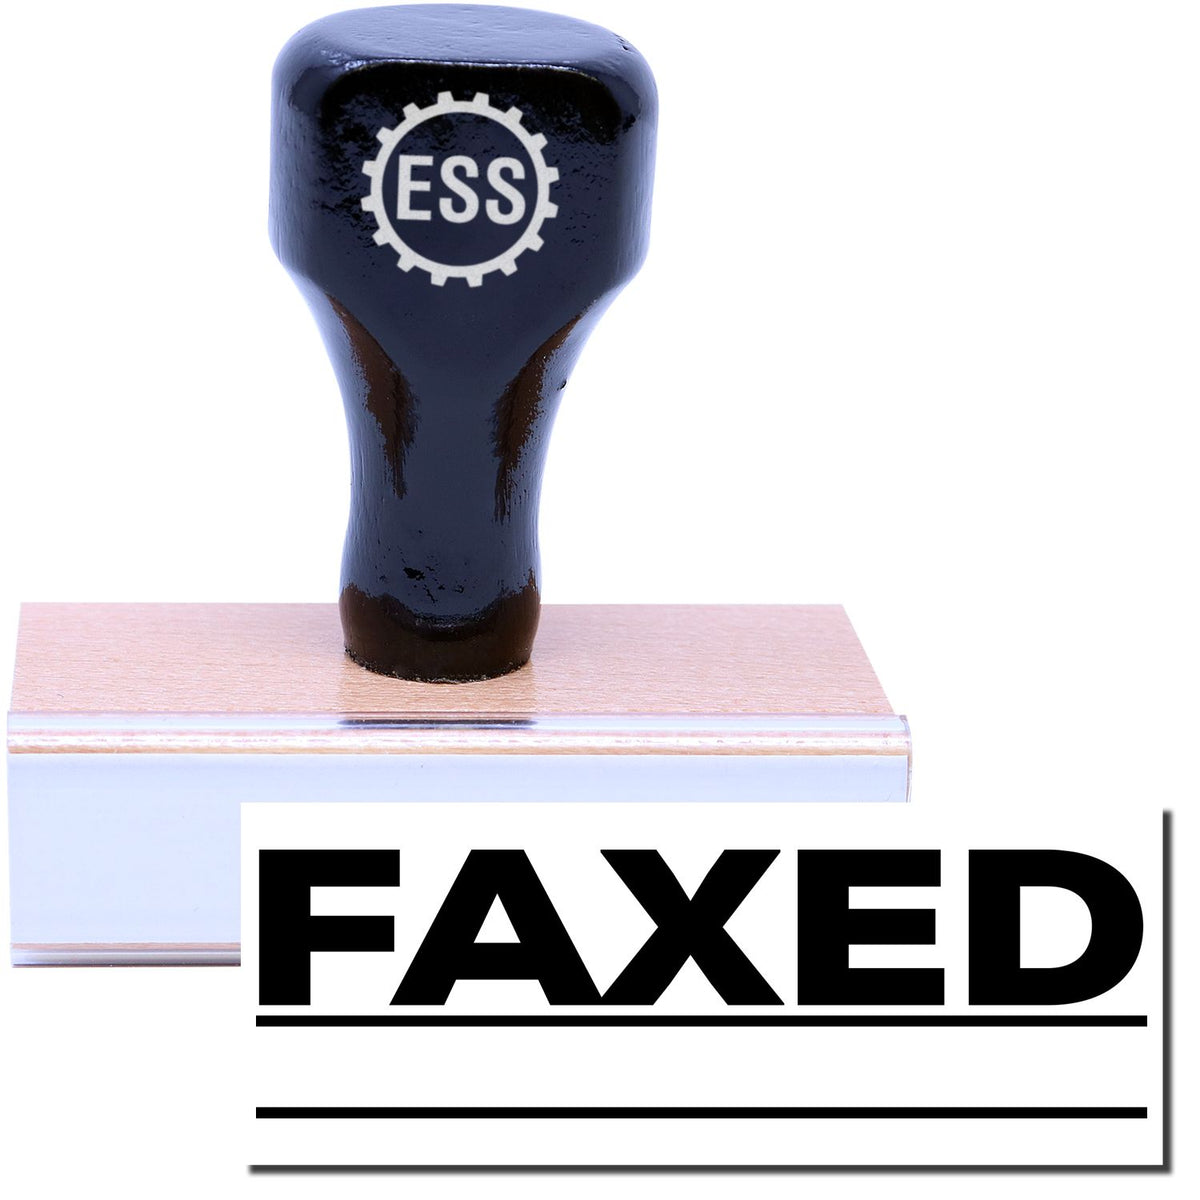 A stock office rubber stamp with a stamped image showing how the text &quot;FAXED&quot; in a large font with a line underneath the text is displayed after stamping.